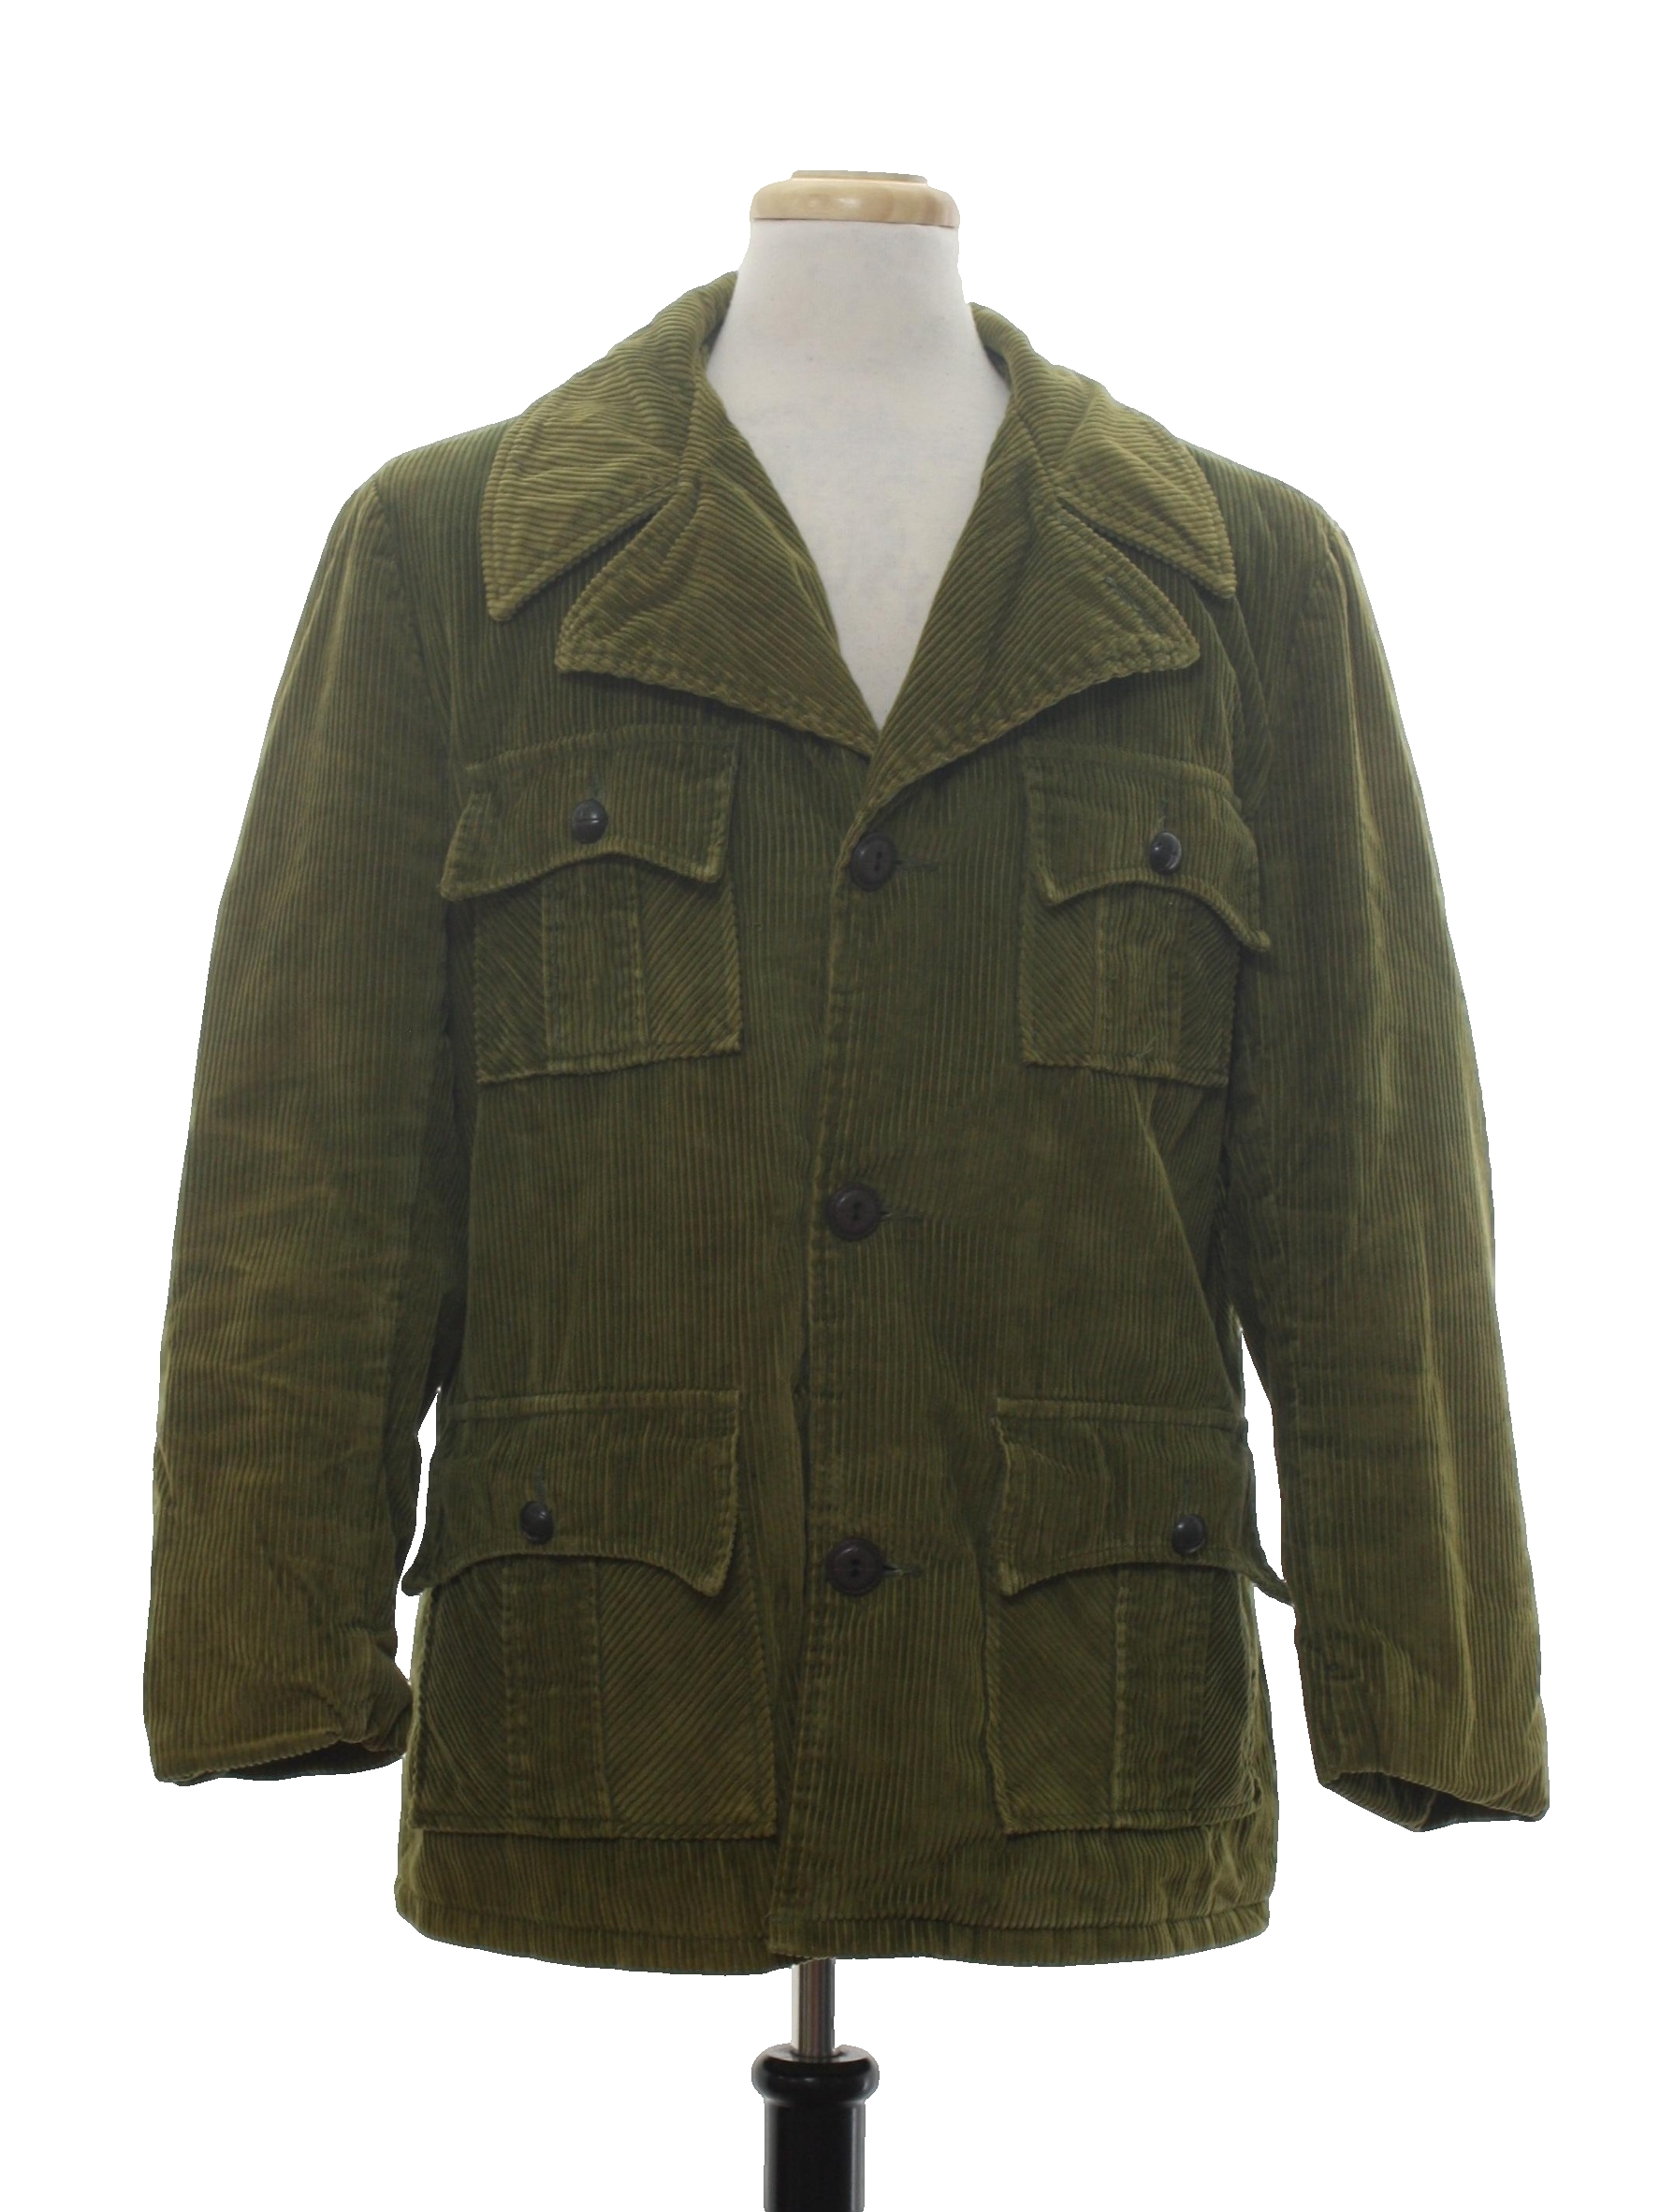 Retro 70s Jacket: 70s -No Label- Mens light olive green wide wale ...